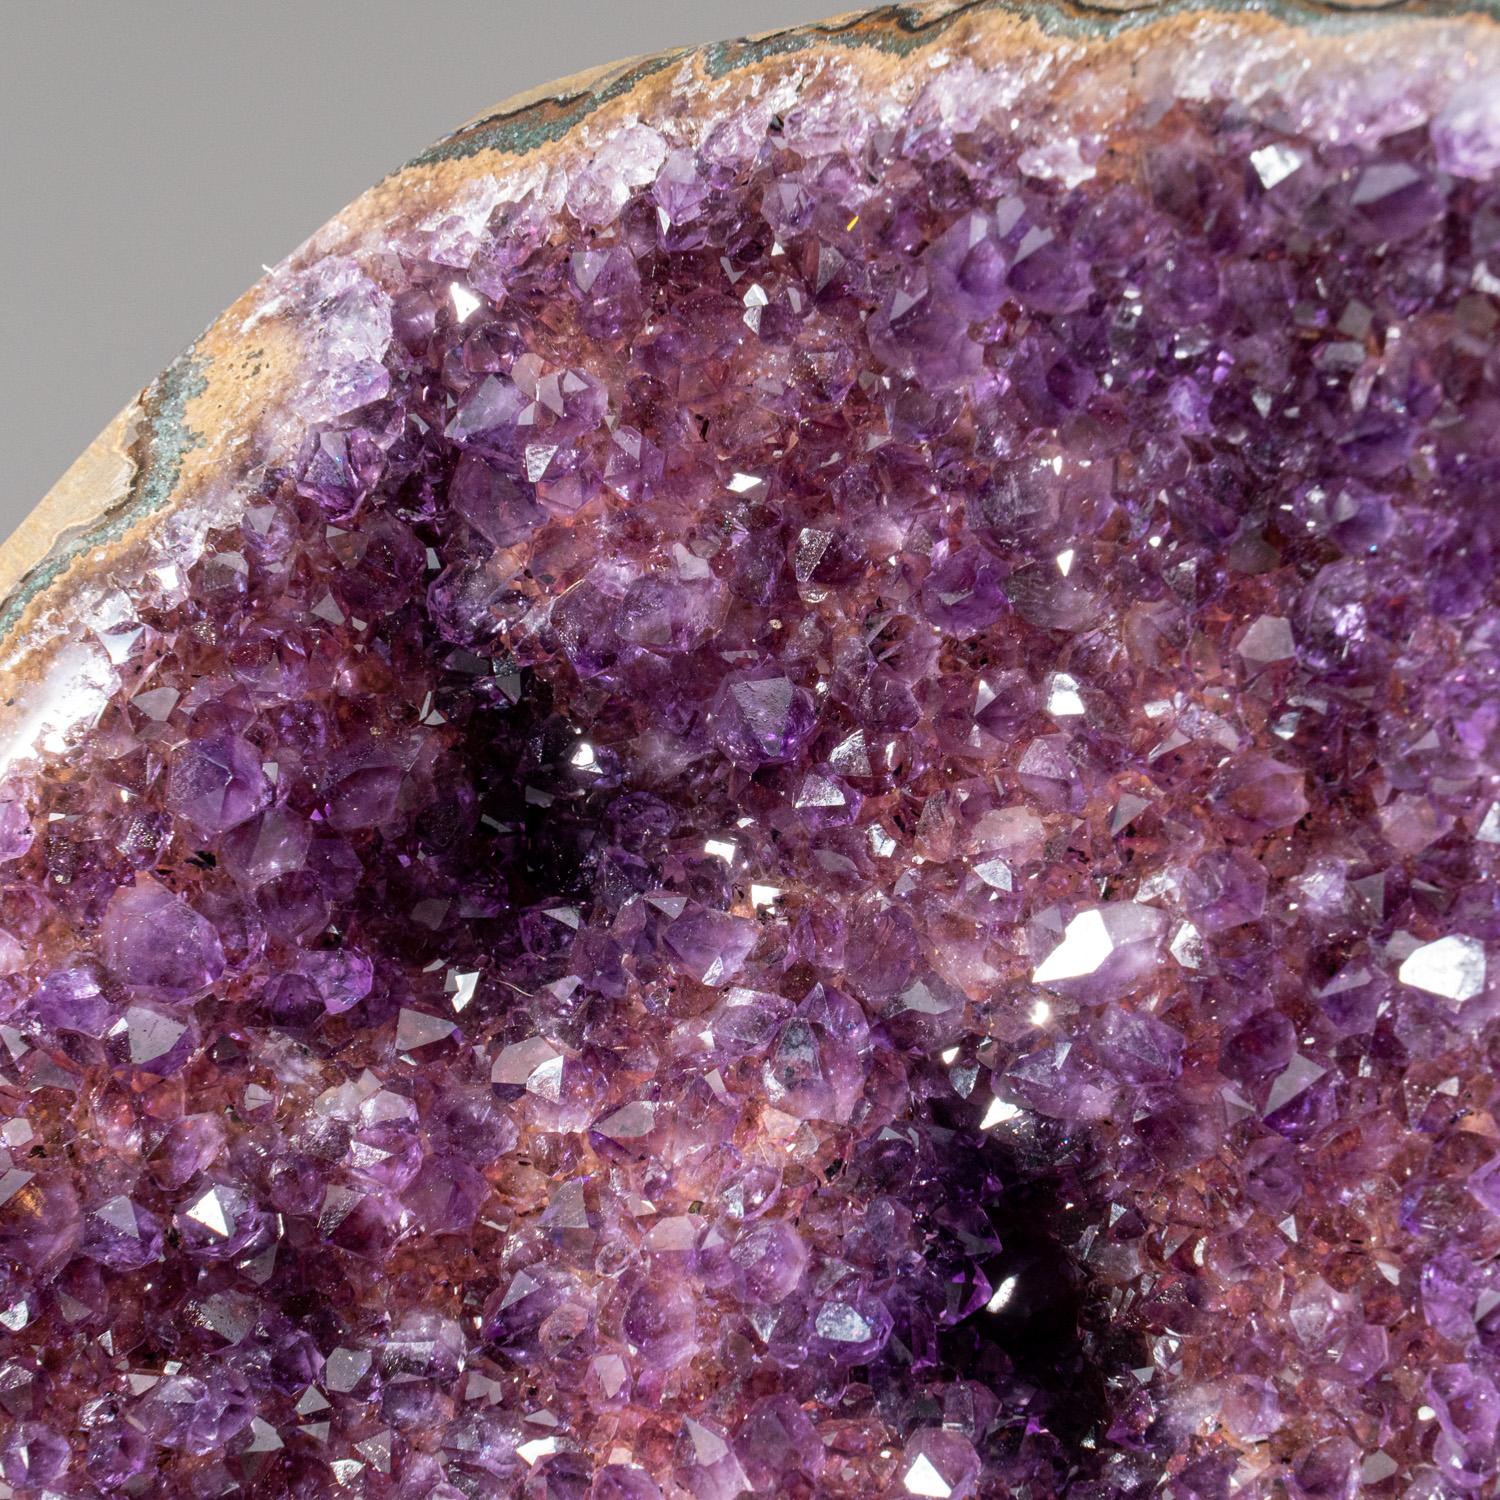 AAA Top Quality natural formation of gem amethyst variety quartz cluster with lustrous fully terminated crystals with highly reflective faces and deep transparent to translucent grape color.
Amethyst is a highly protective and effective crystal